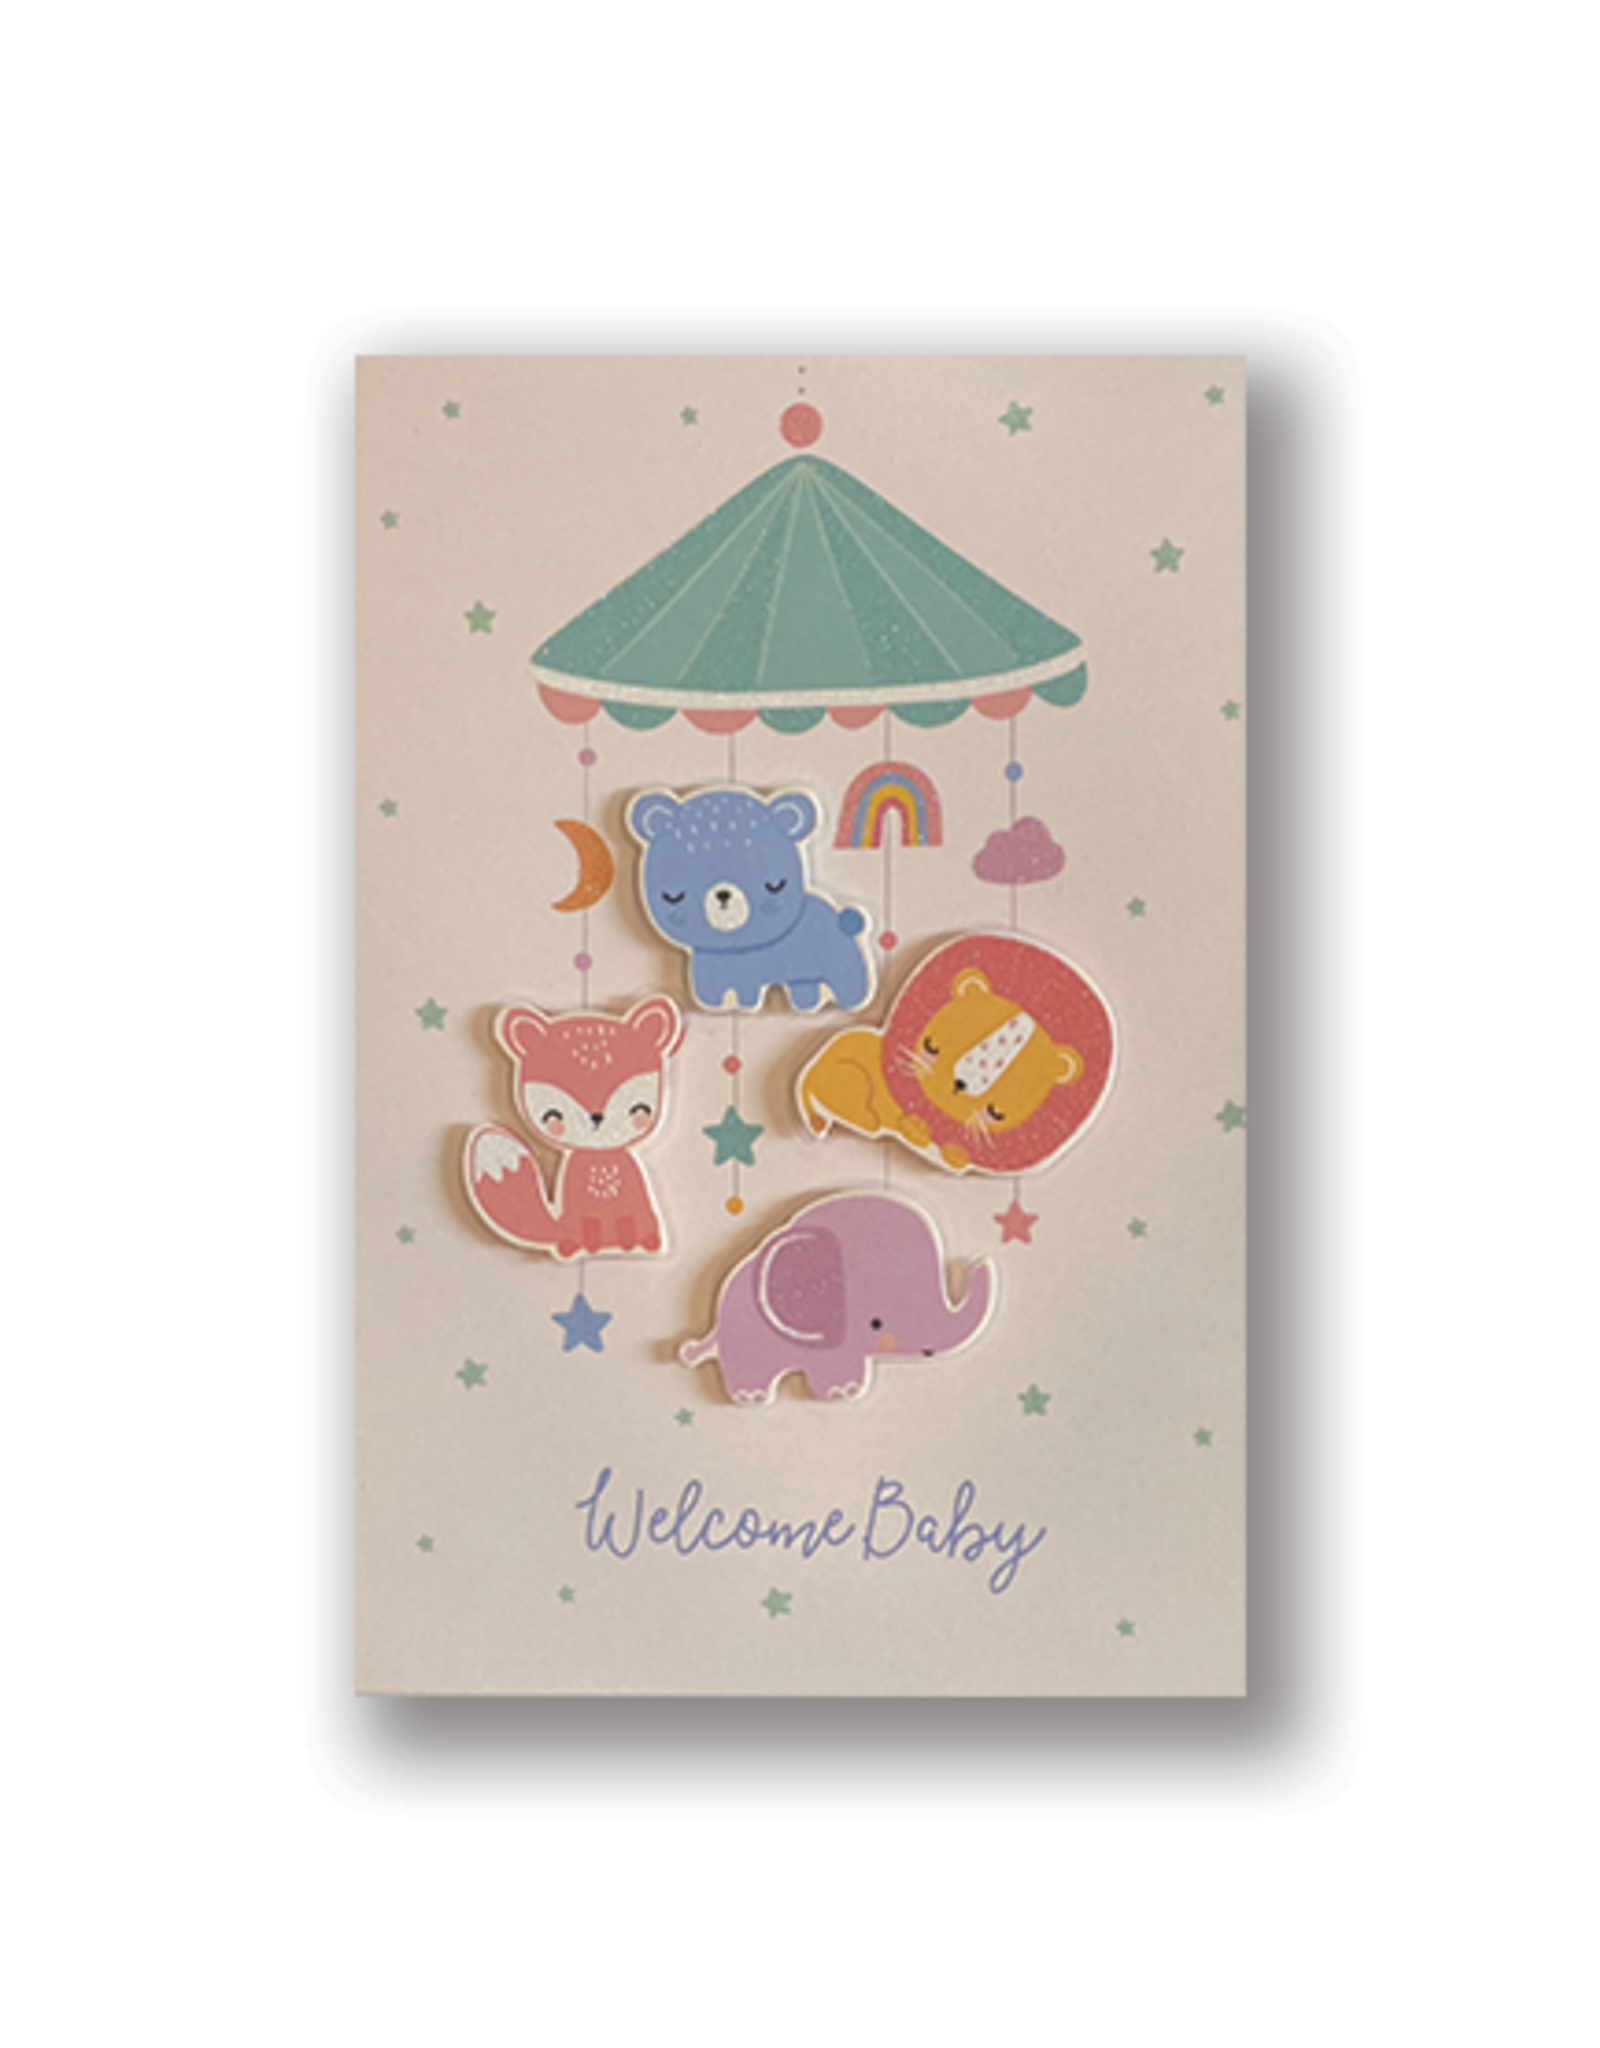 "Welcome Baby" Card